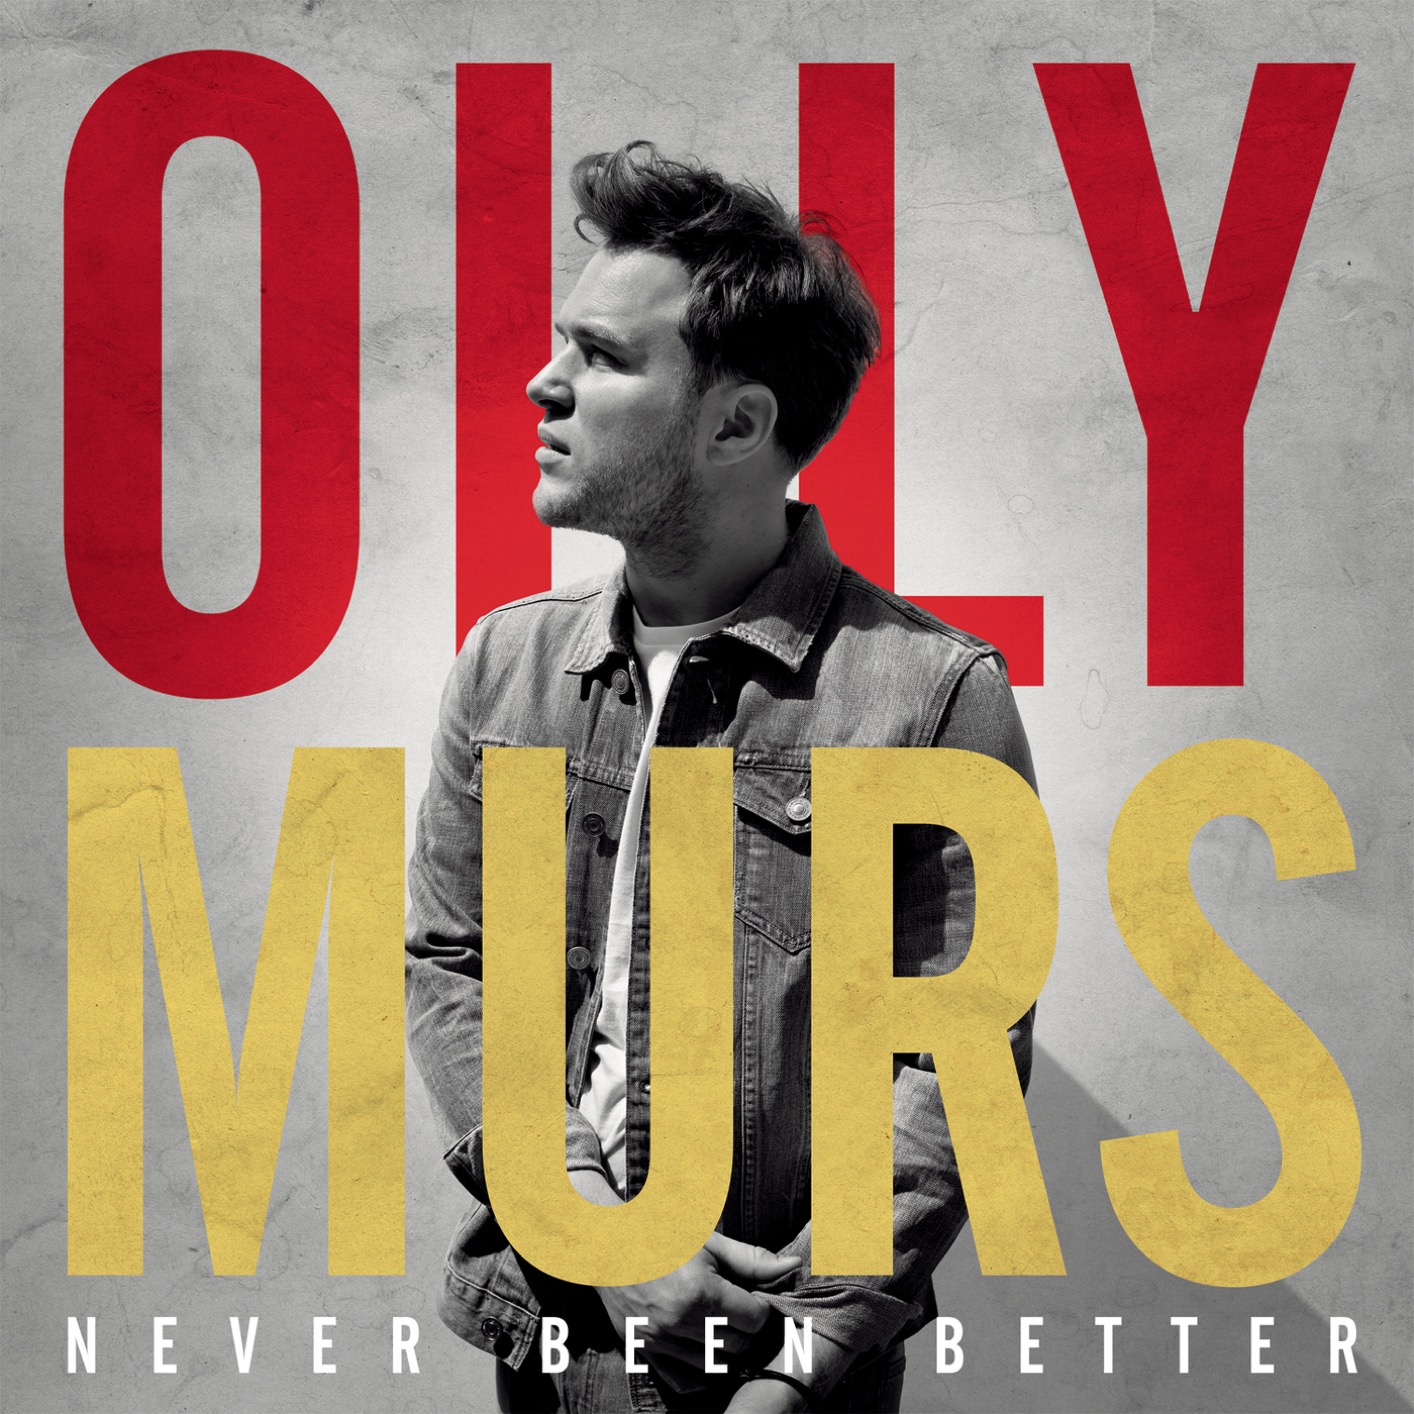 Olly Murs - Never Been Better (Expanded Edition) (2014/2020) [FLAC 24bit/44,1kHz]